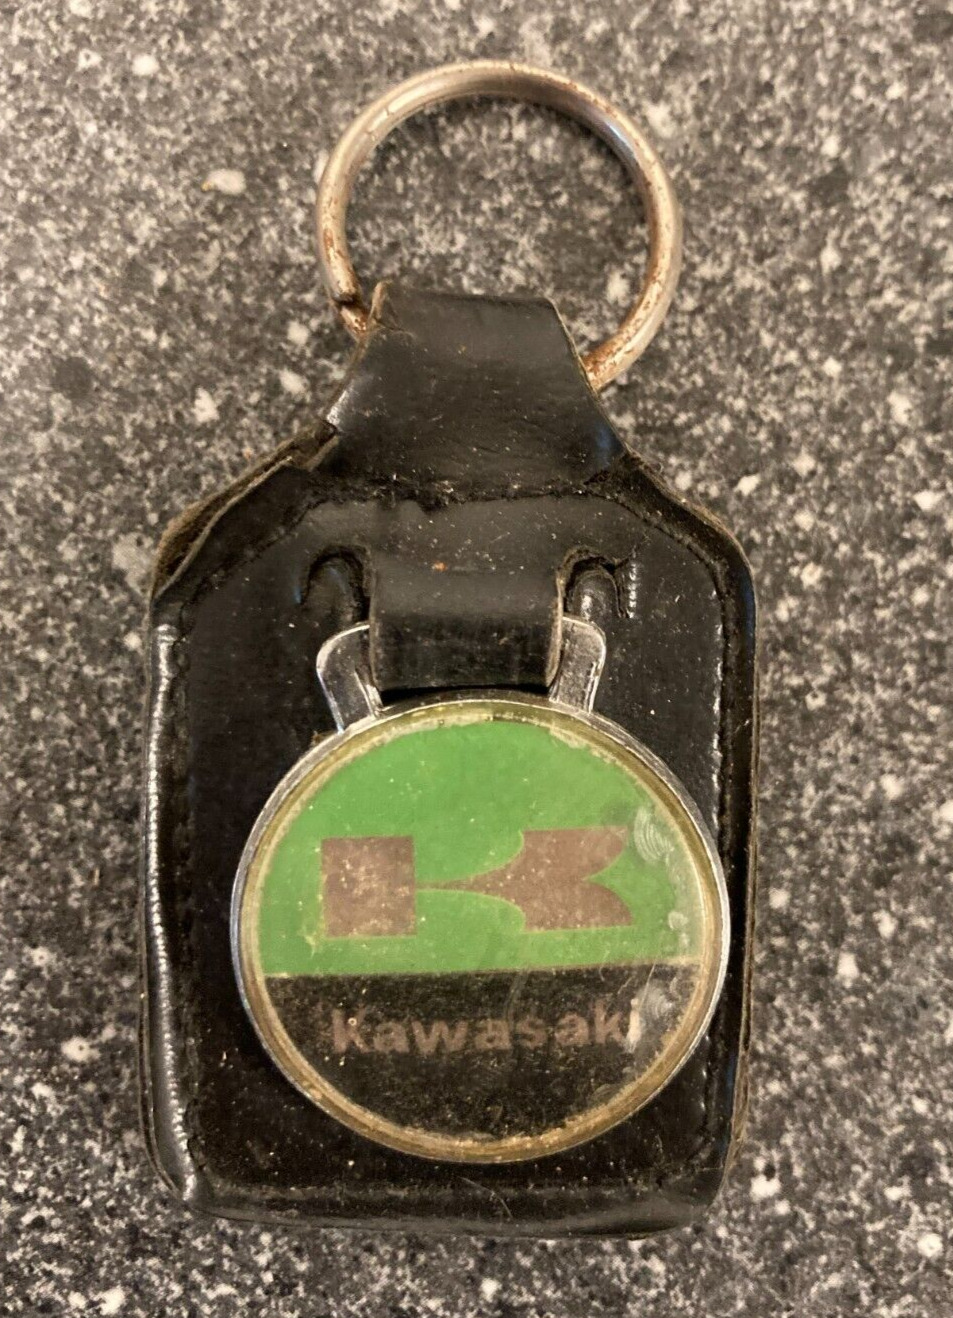 Vintage Kawasaki Keychain - Classic Leather and Metal Design with Logo